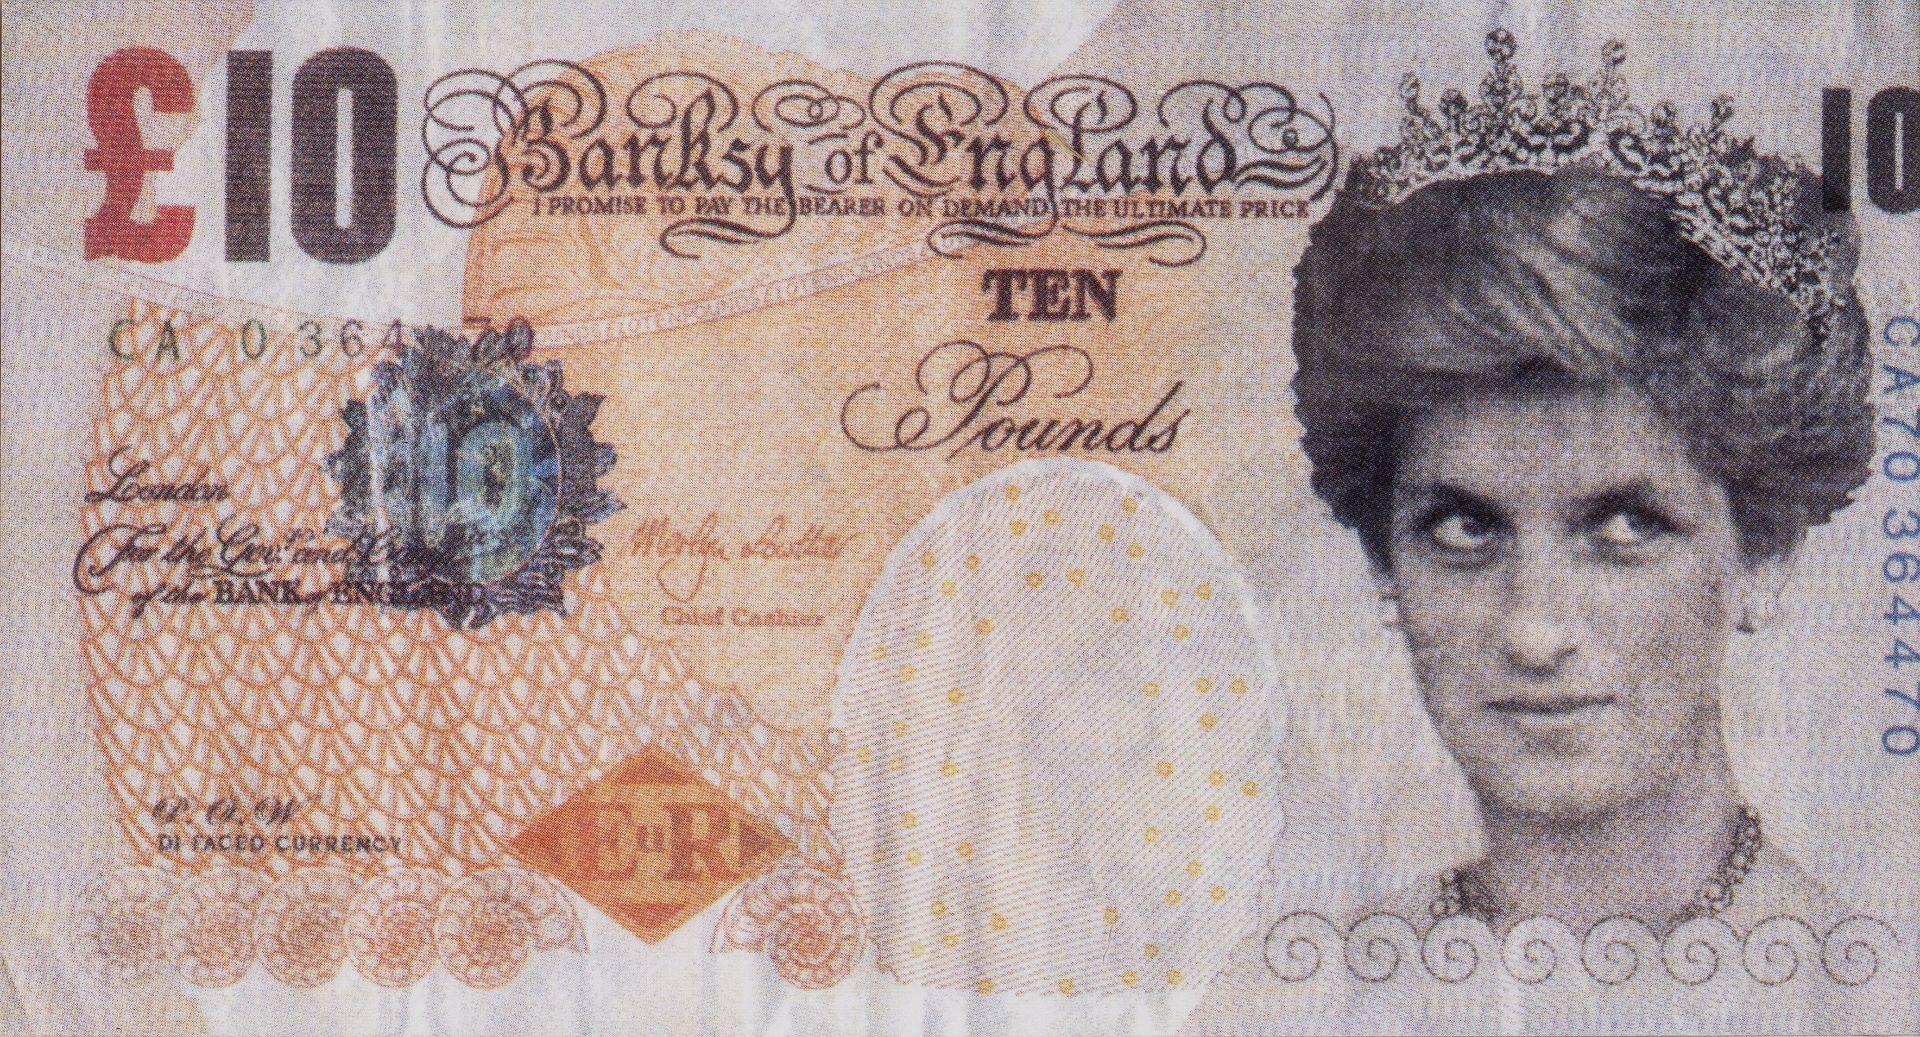 Banksy (b.1974) 'Di-Faced tenner', offset lithograph, 14cm x 7.5cm The note itself is in good